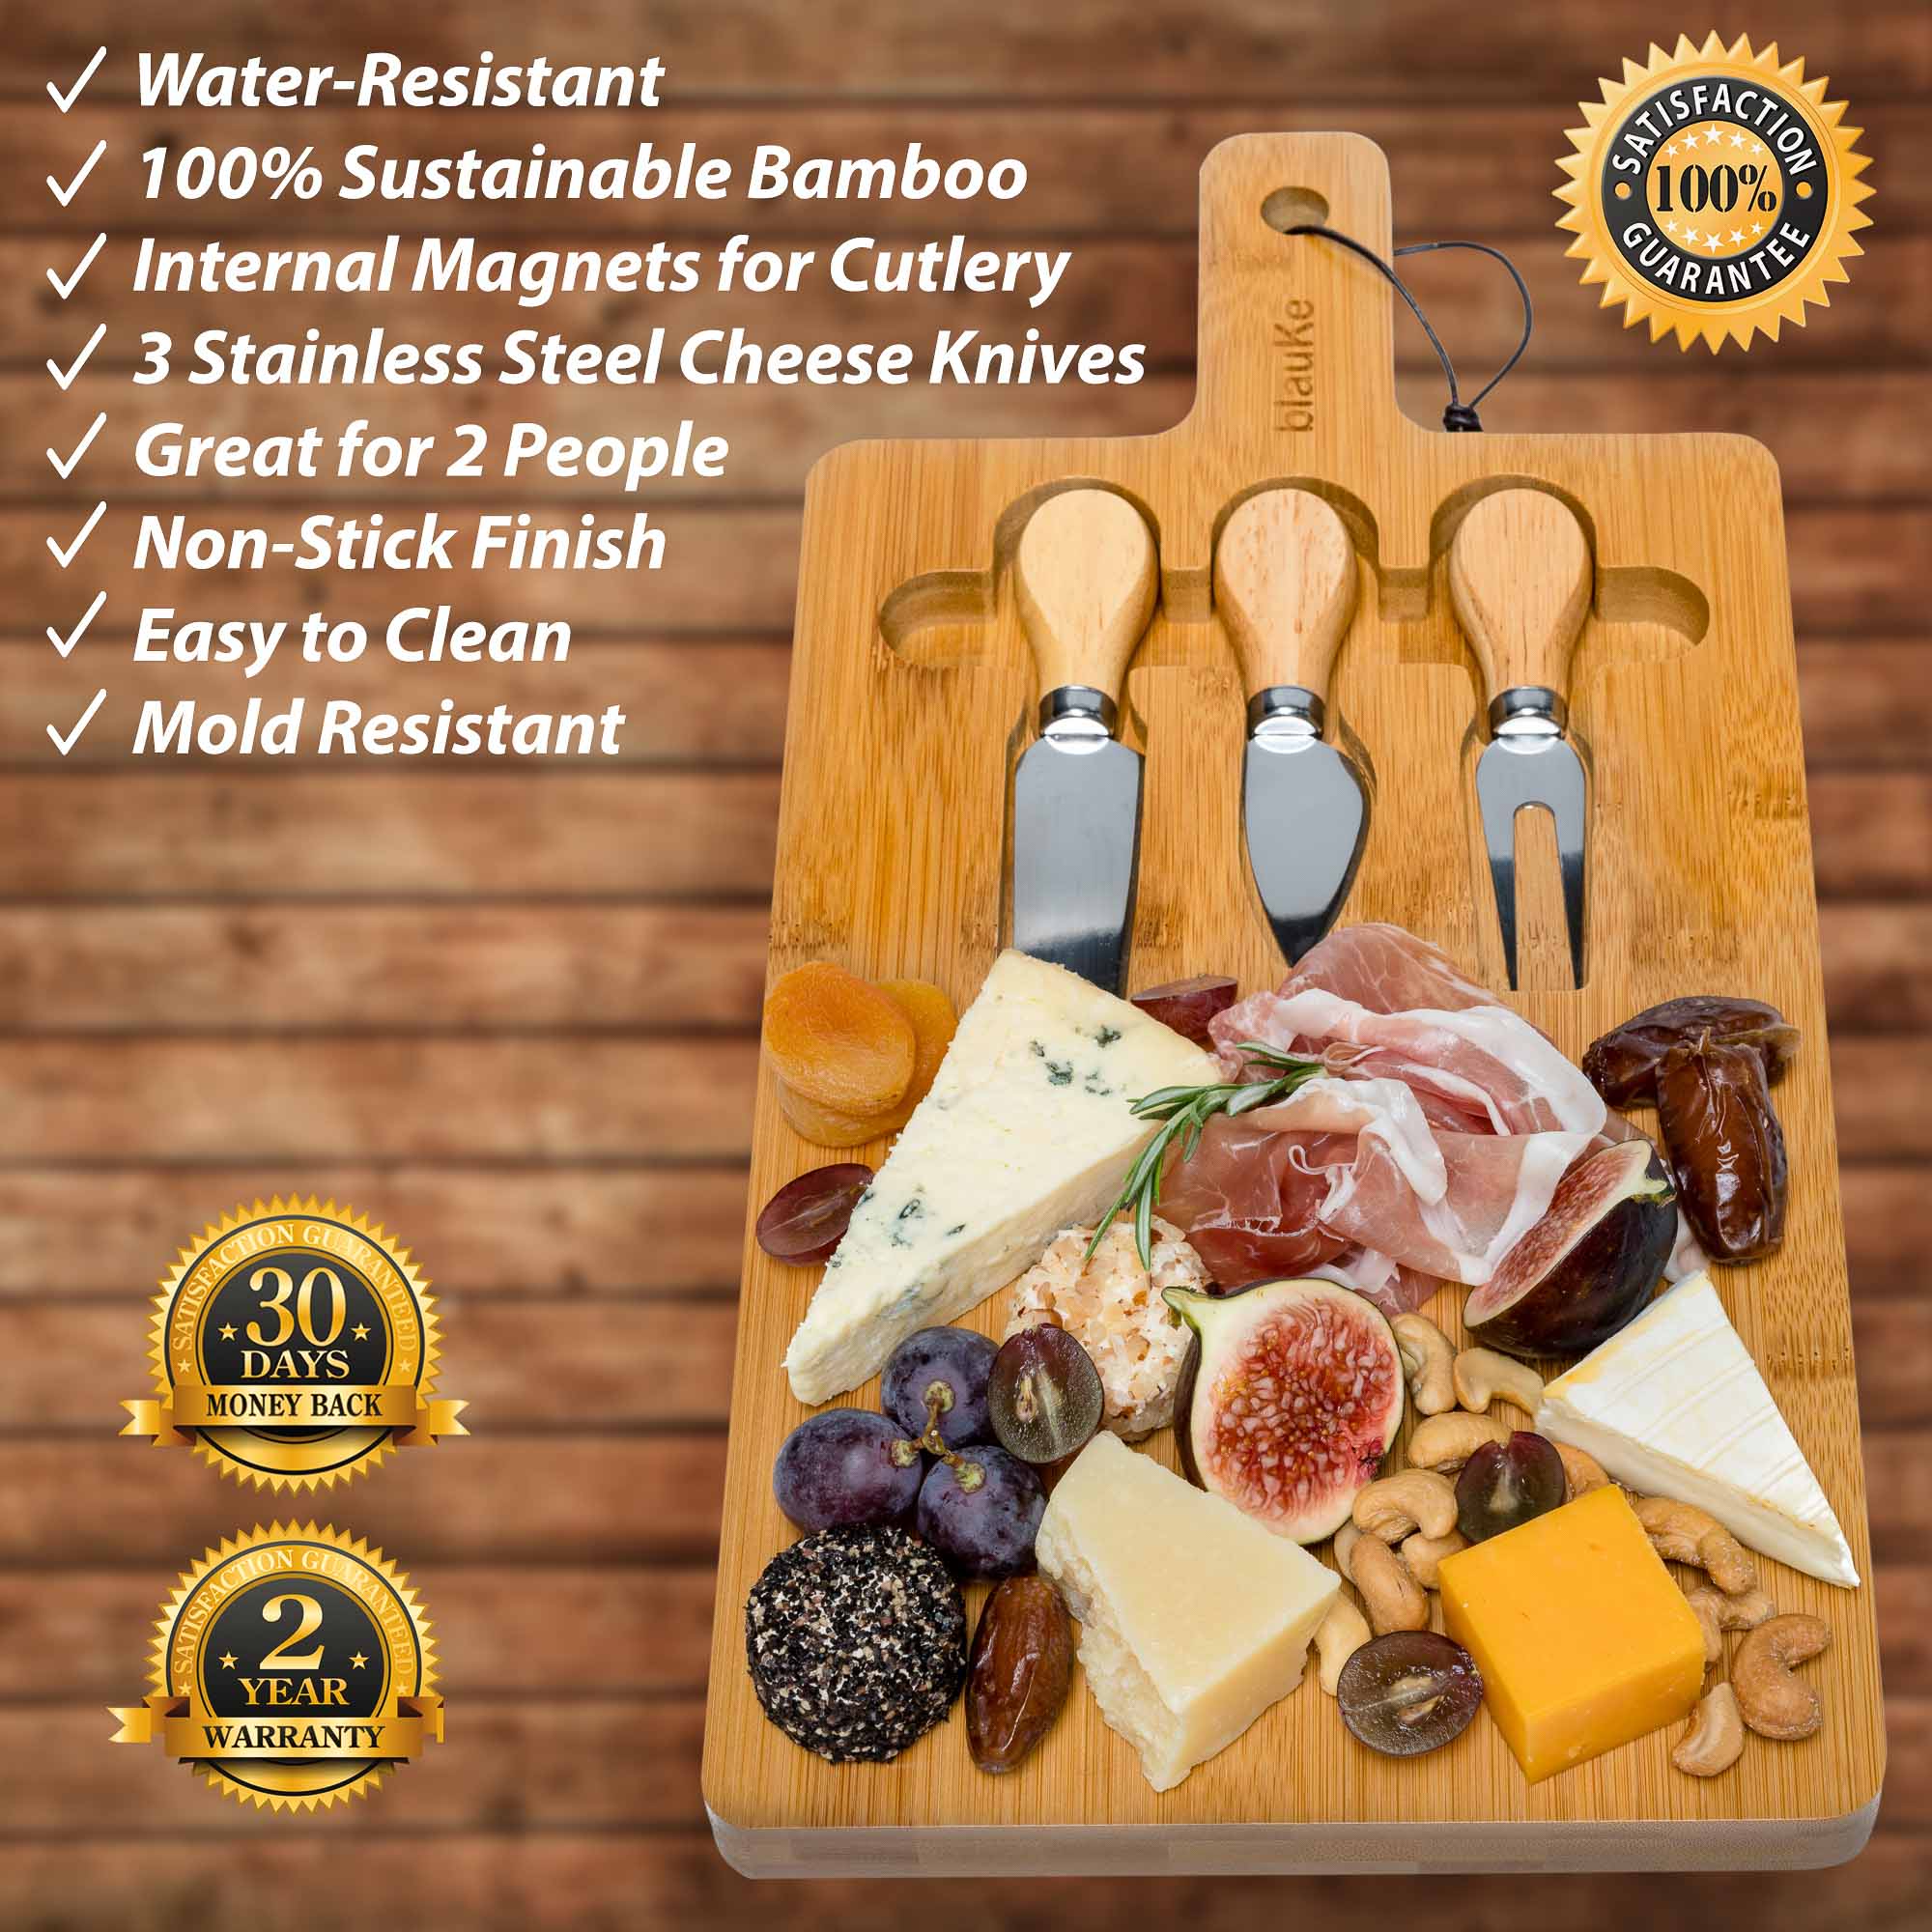 Bamboo Cheese Board and Knife Set - 12x8 inch